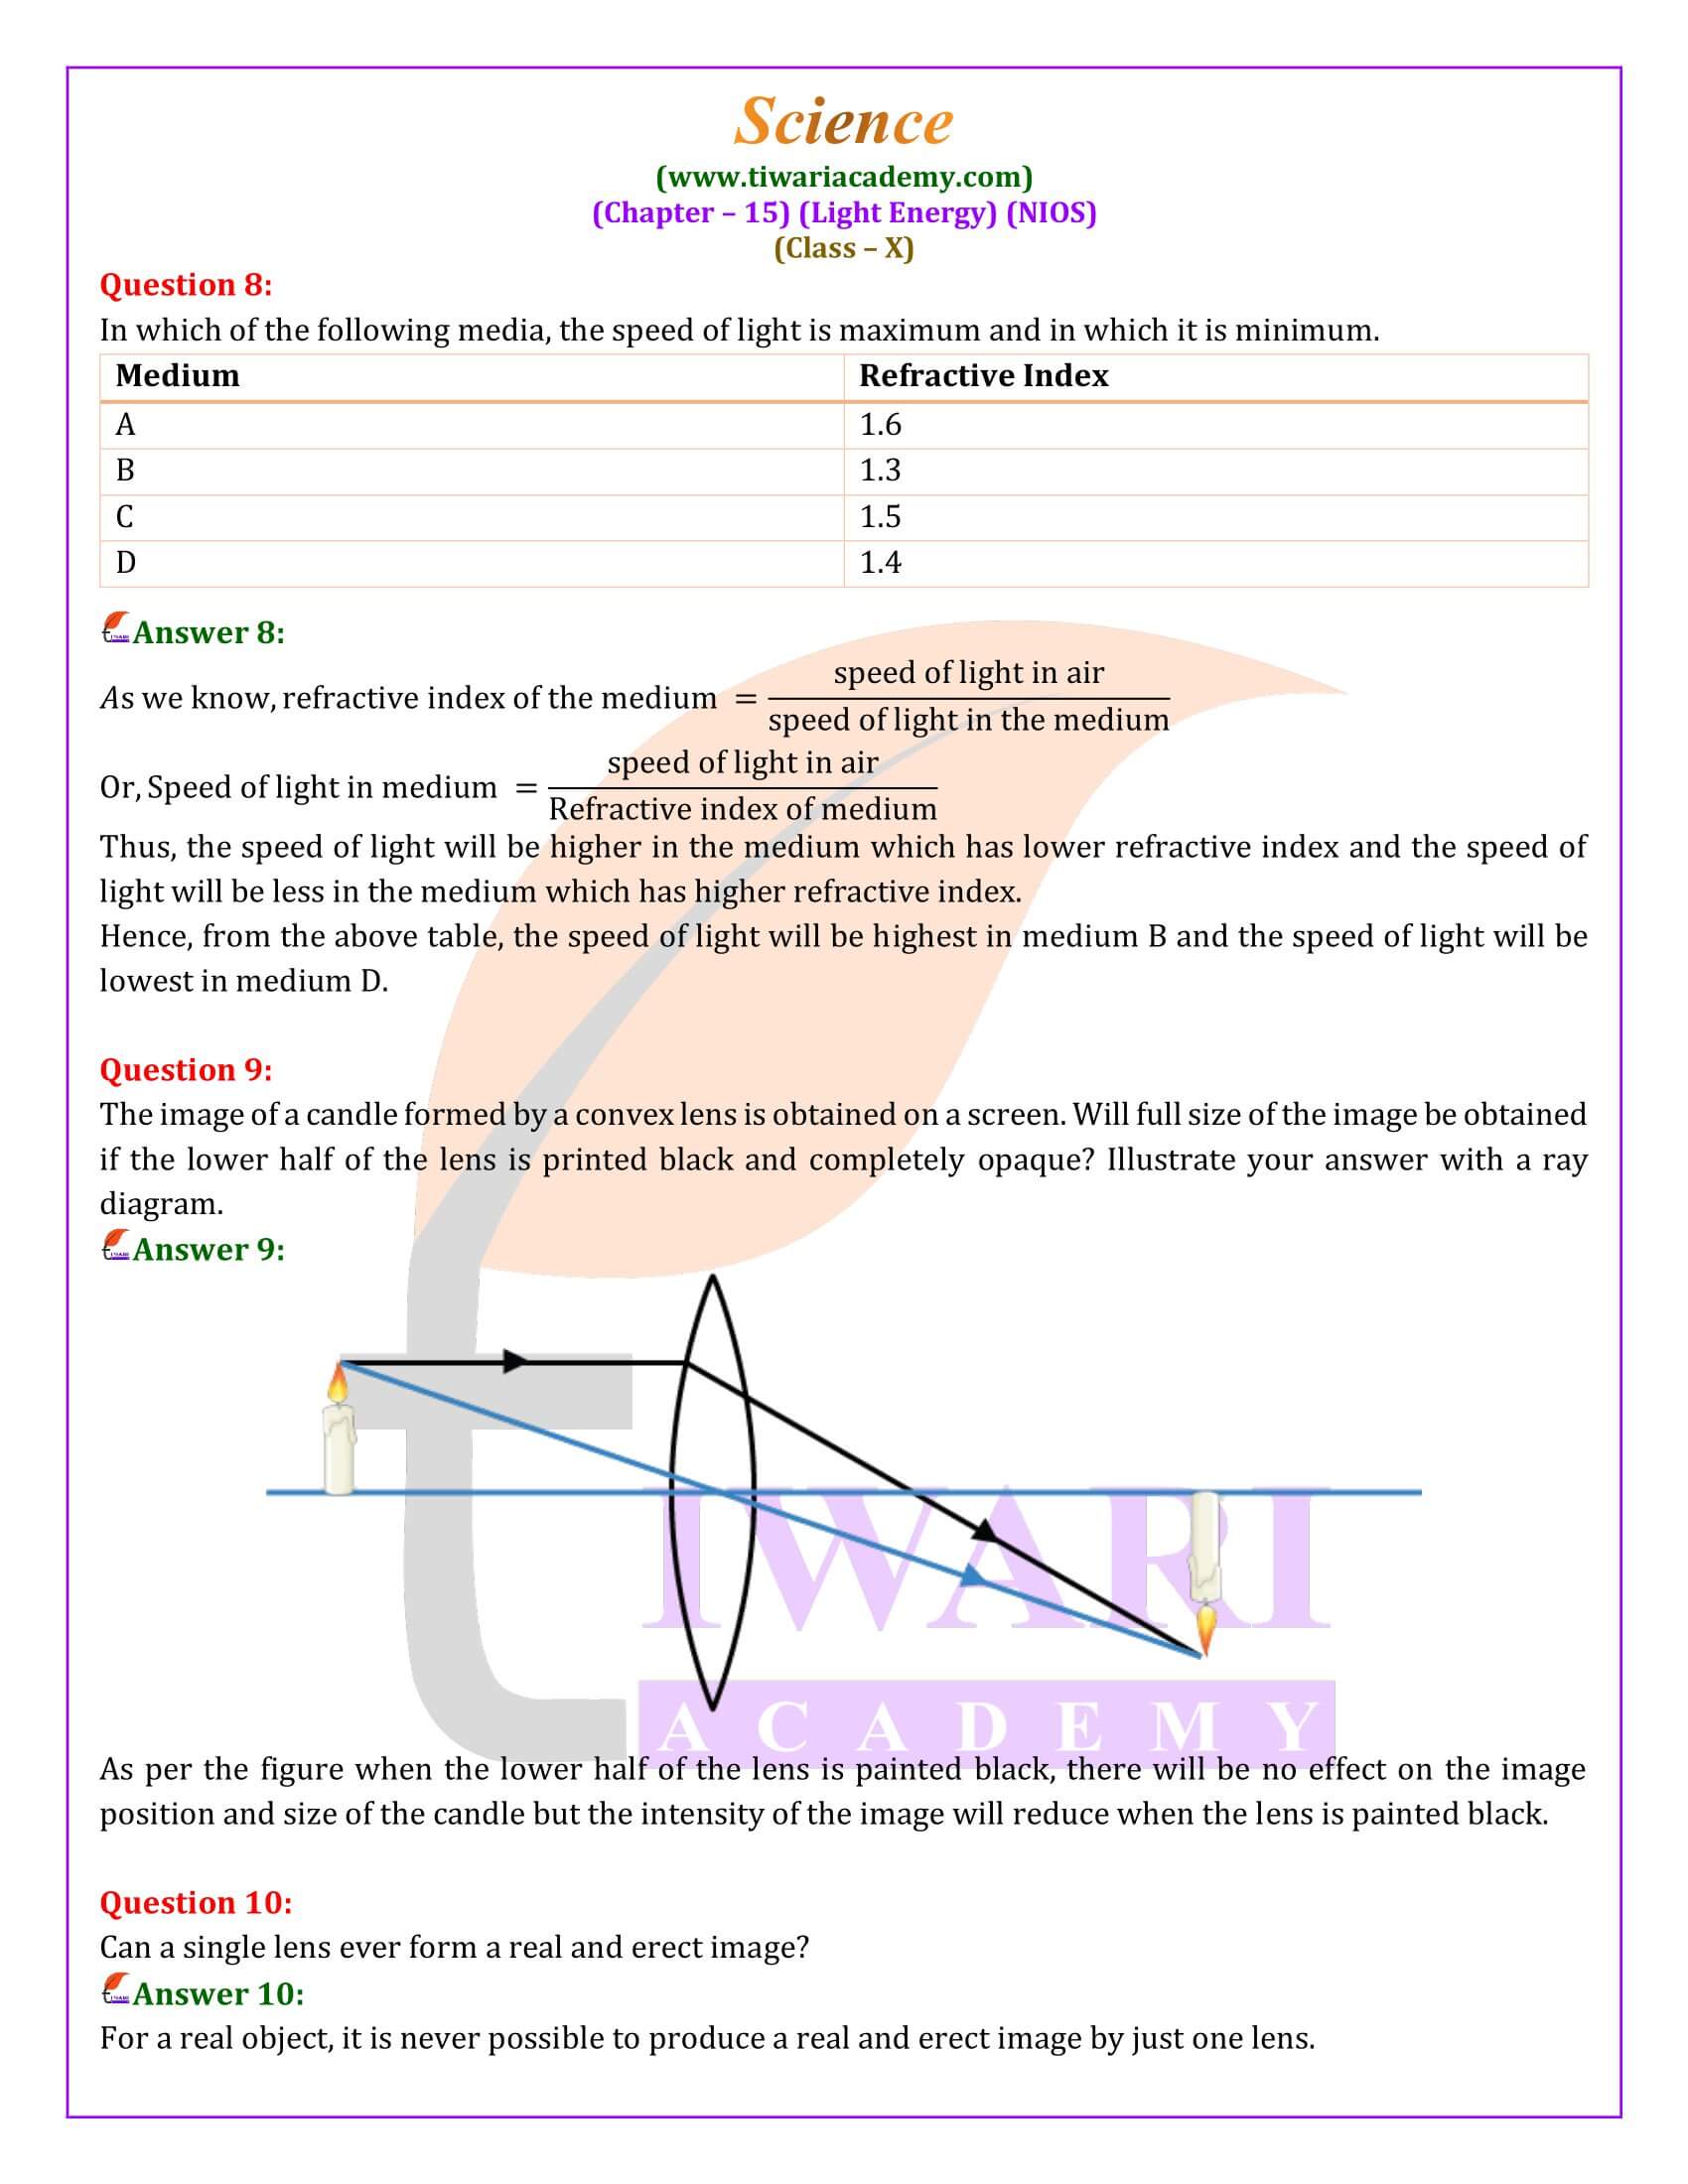 NIOS Class 10th Science Chapter 15 Solution